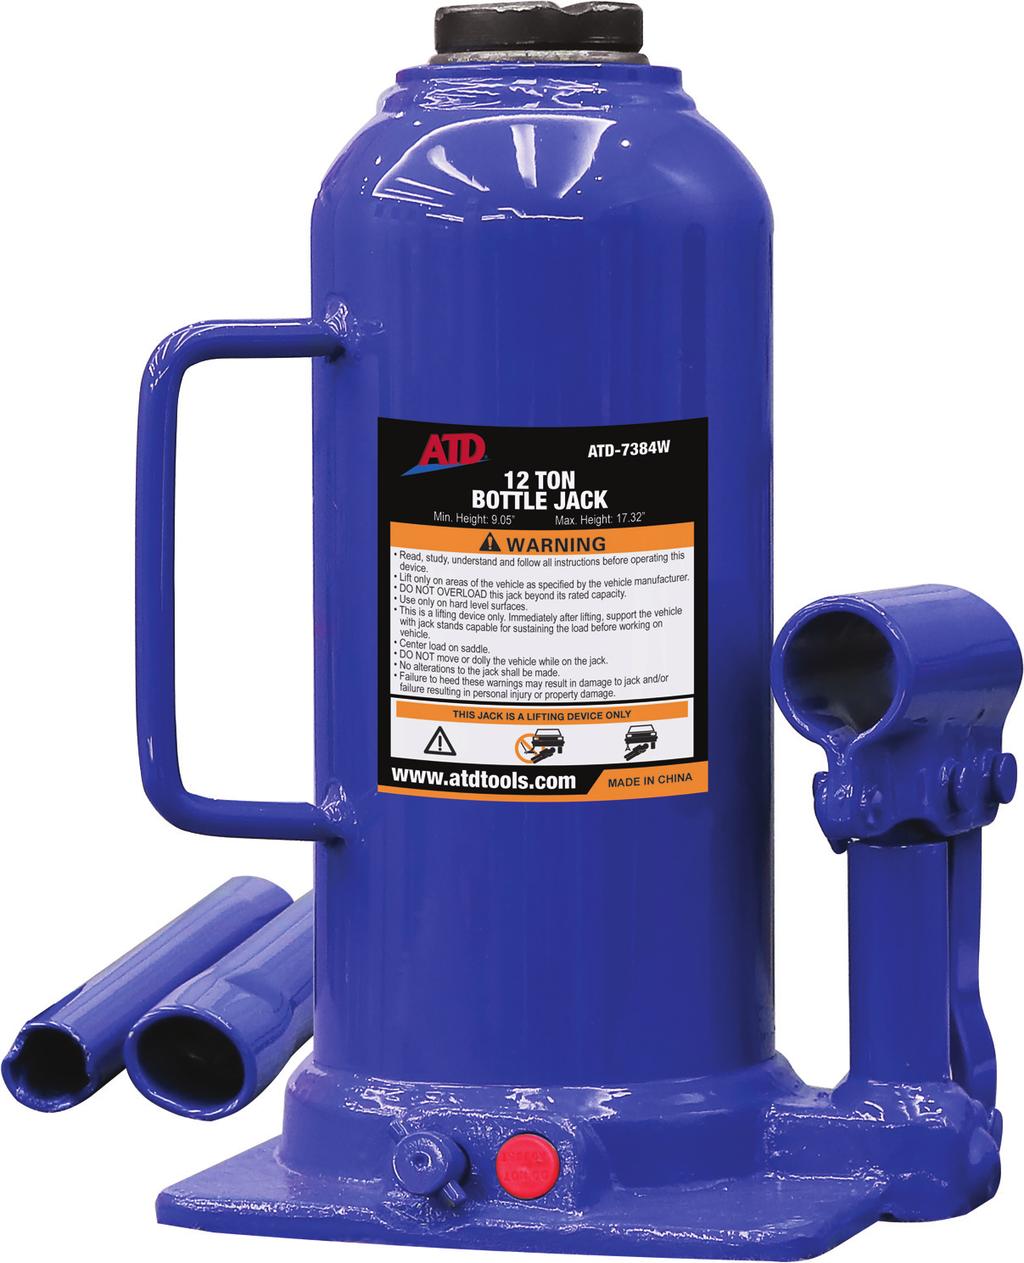 ATD-7384W 12-Ton Bottle Jack Owner s Manual Features: Specifications Made in